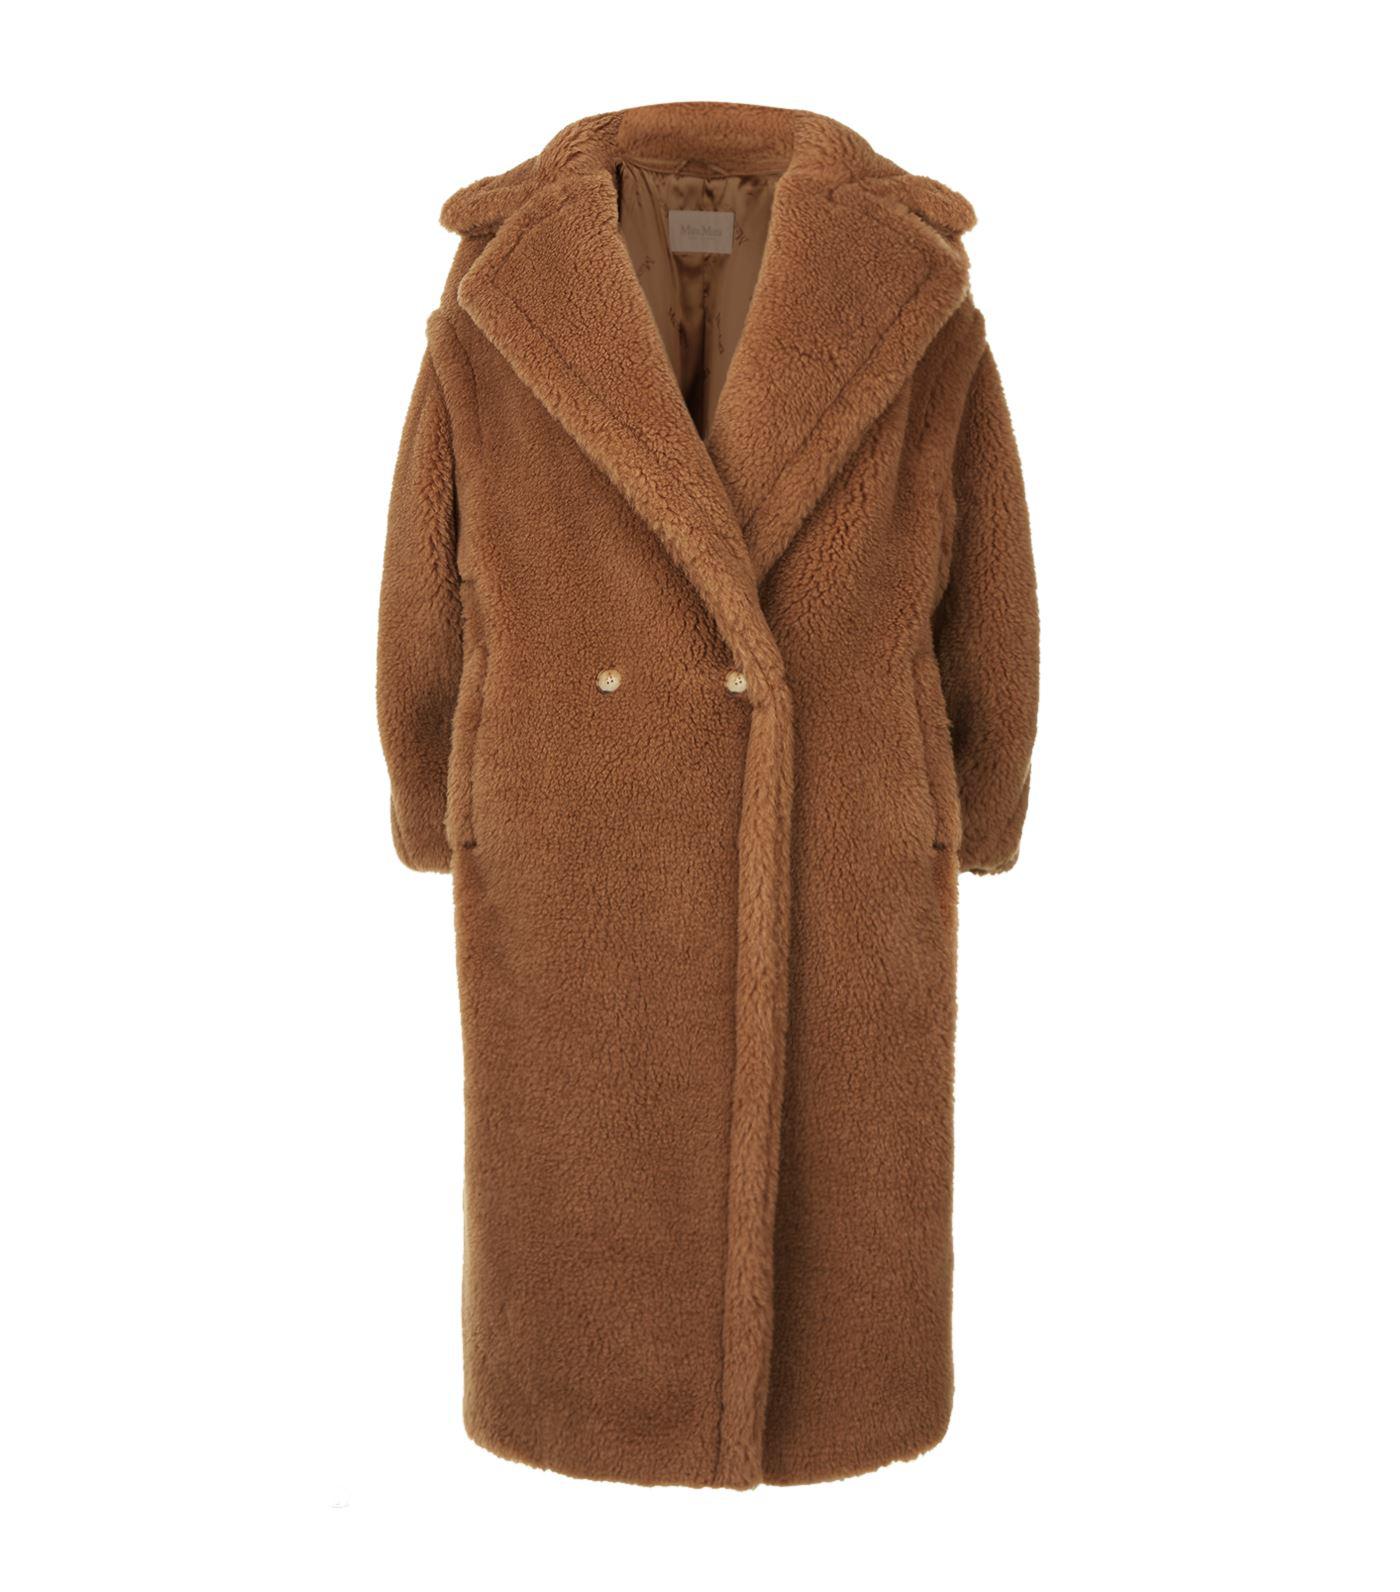 Lyst - Max Mara Teddy Bear Icon Coat in Natural - Save 17.794572311920305%